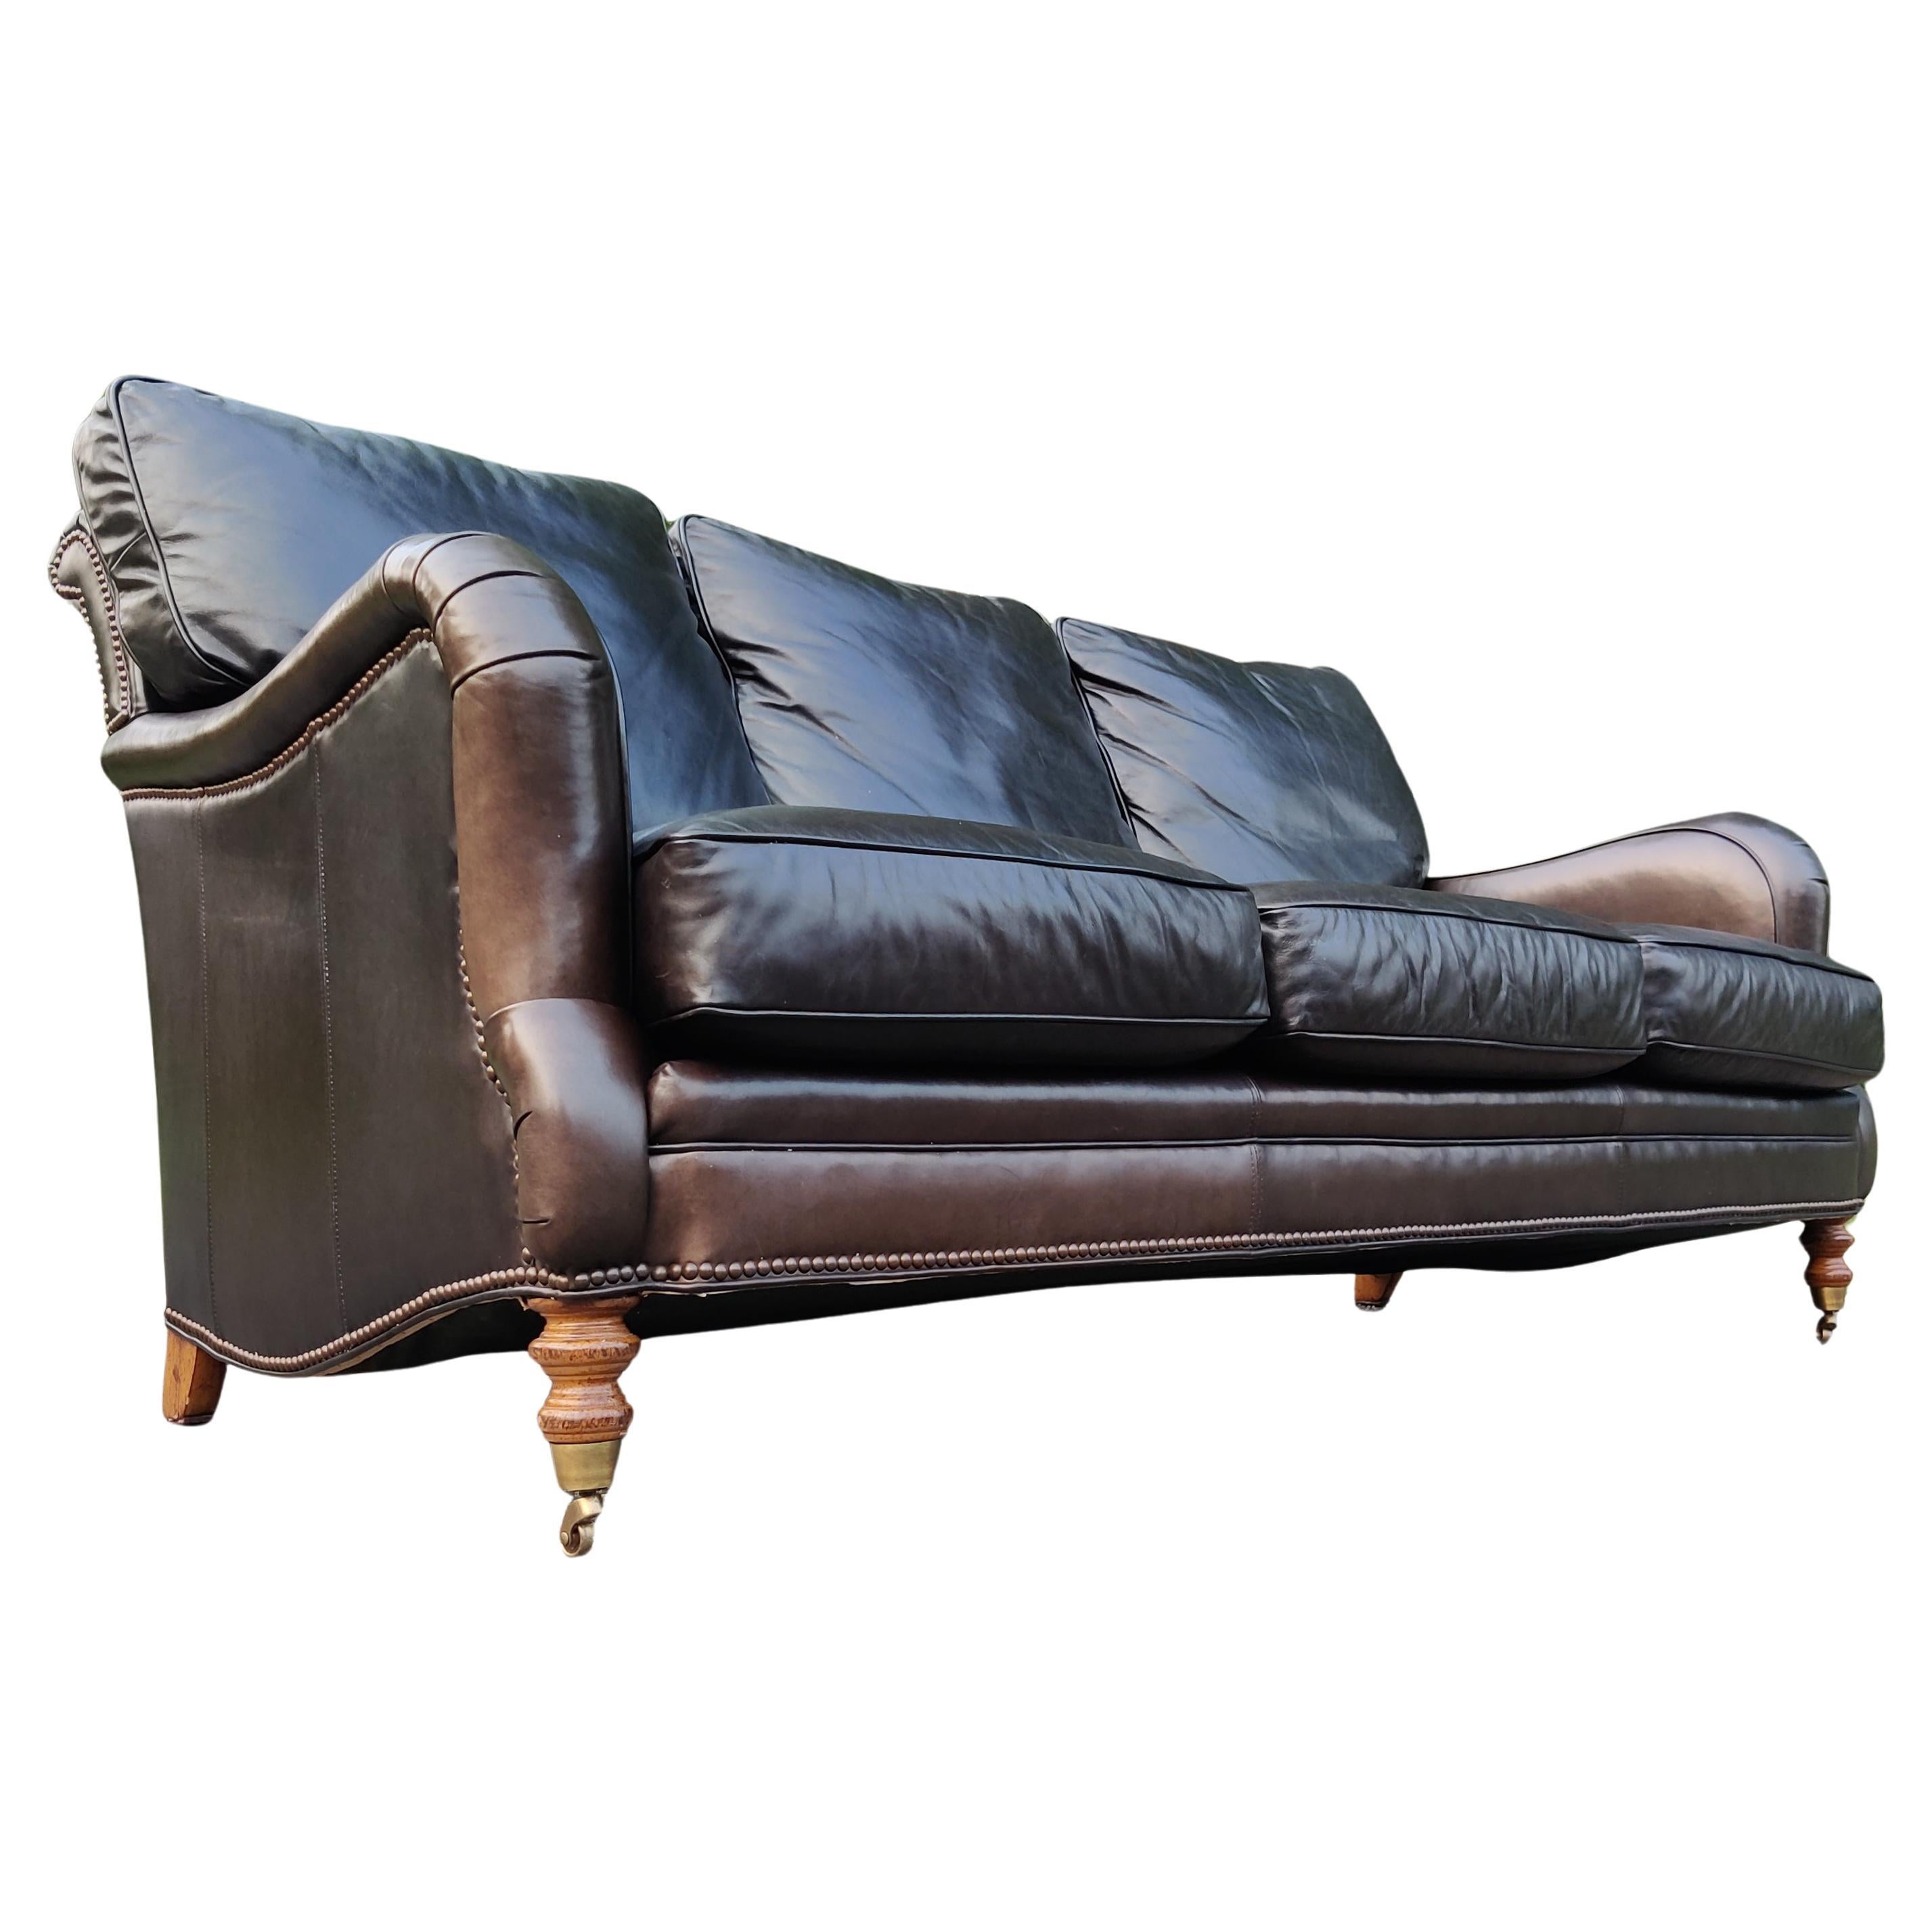 English Regency 3-Seater 'Espresso' Leather & Brass Sofa, Style of George Smith For Sale